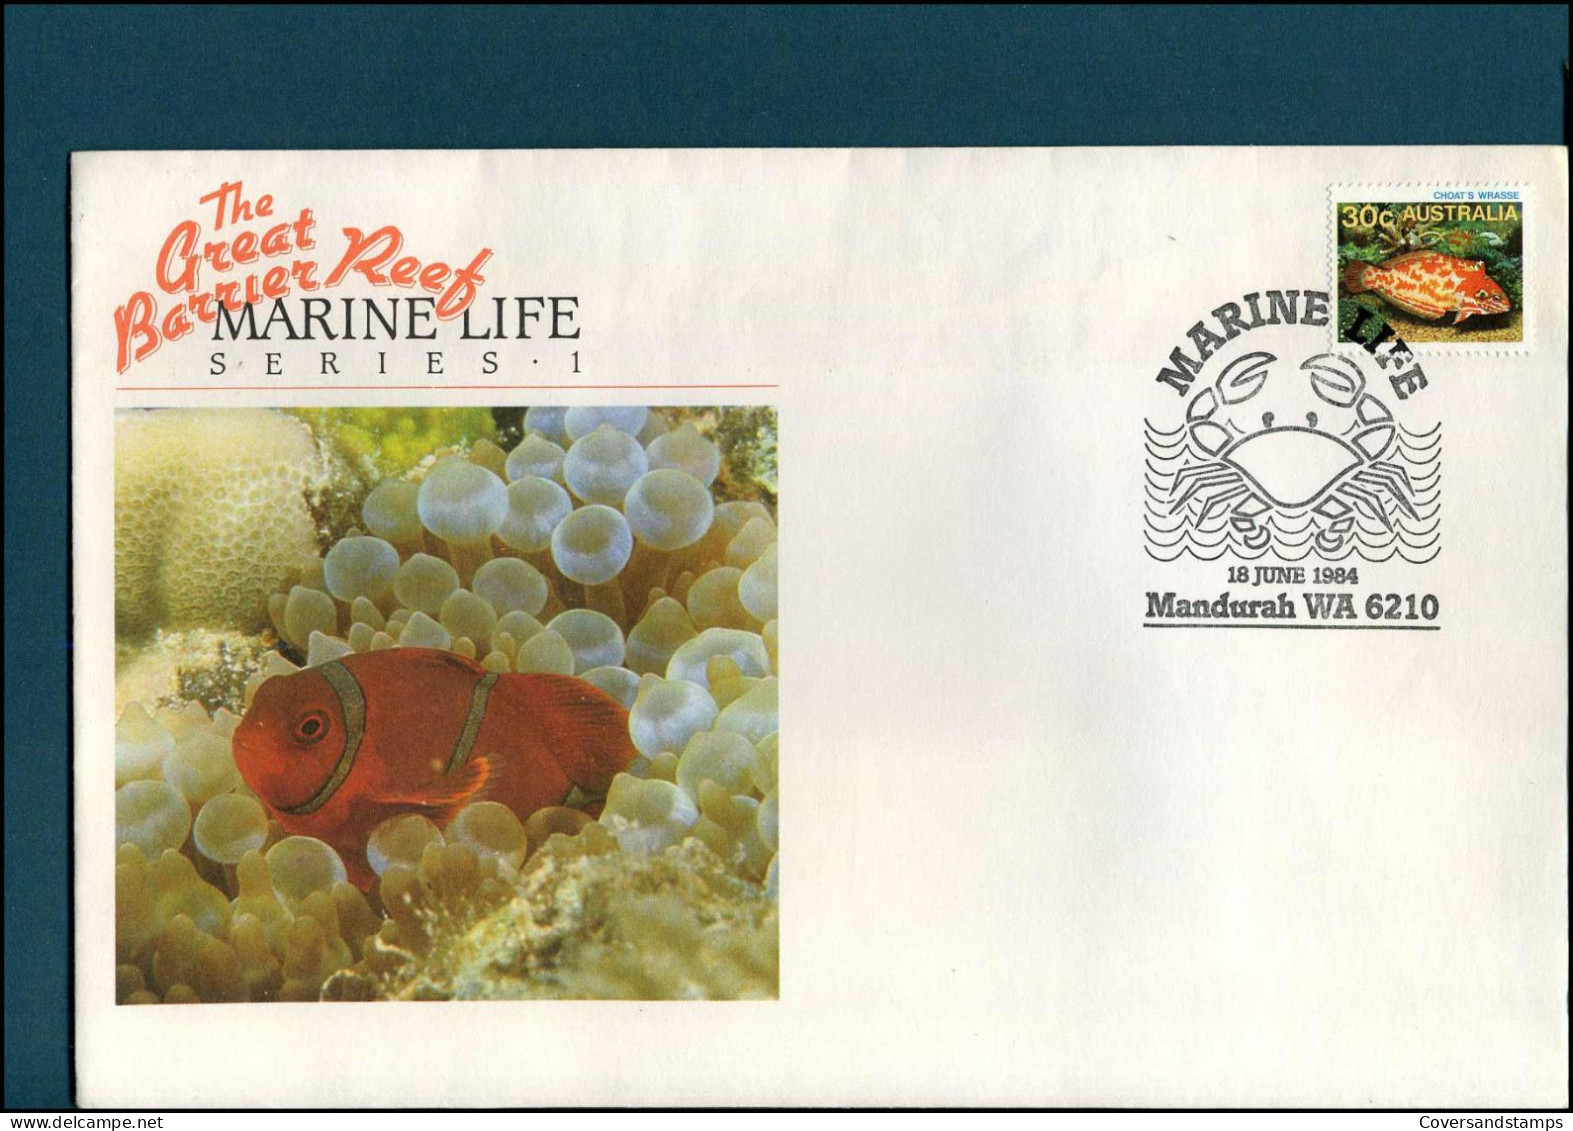 FDC - Marine Life Series 1 - The Great Barrier Reef - FDC